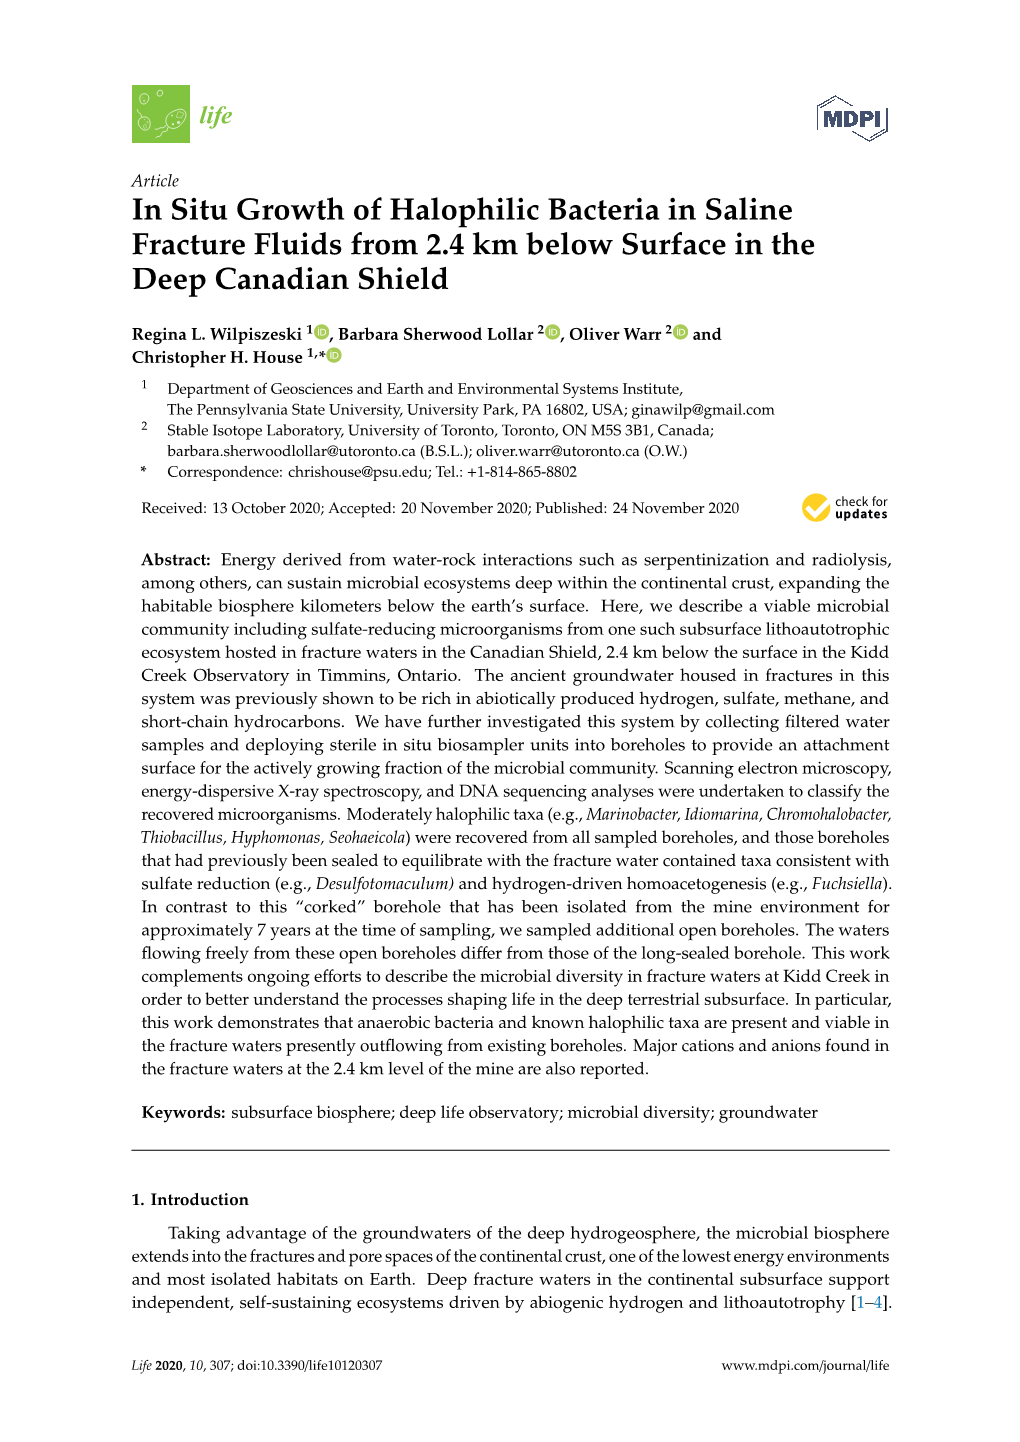 In Situ Growth of Halophilic Bacteria in Saline Fracture Fluids from 2.4 Km Below Surface in the Deep Canadian Shield